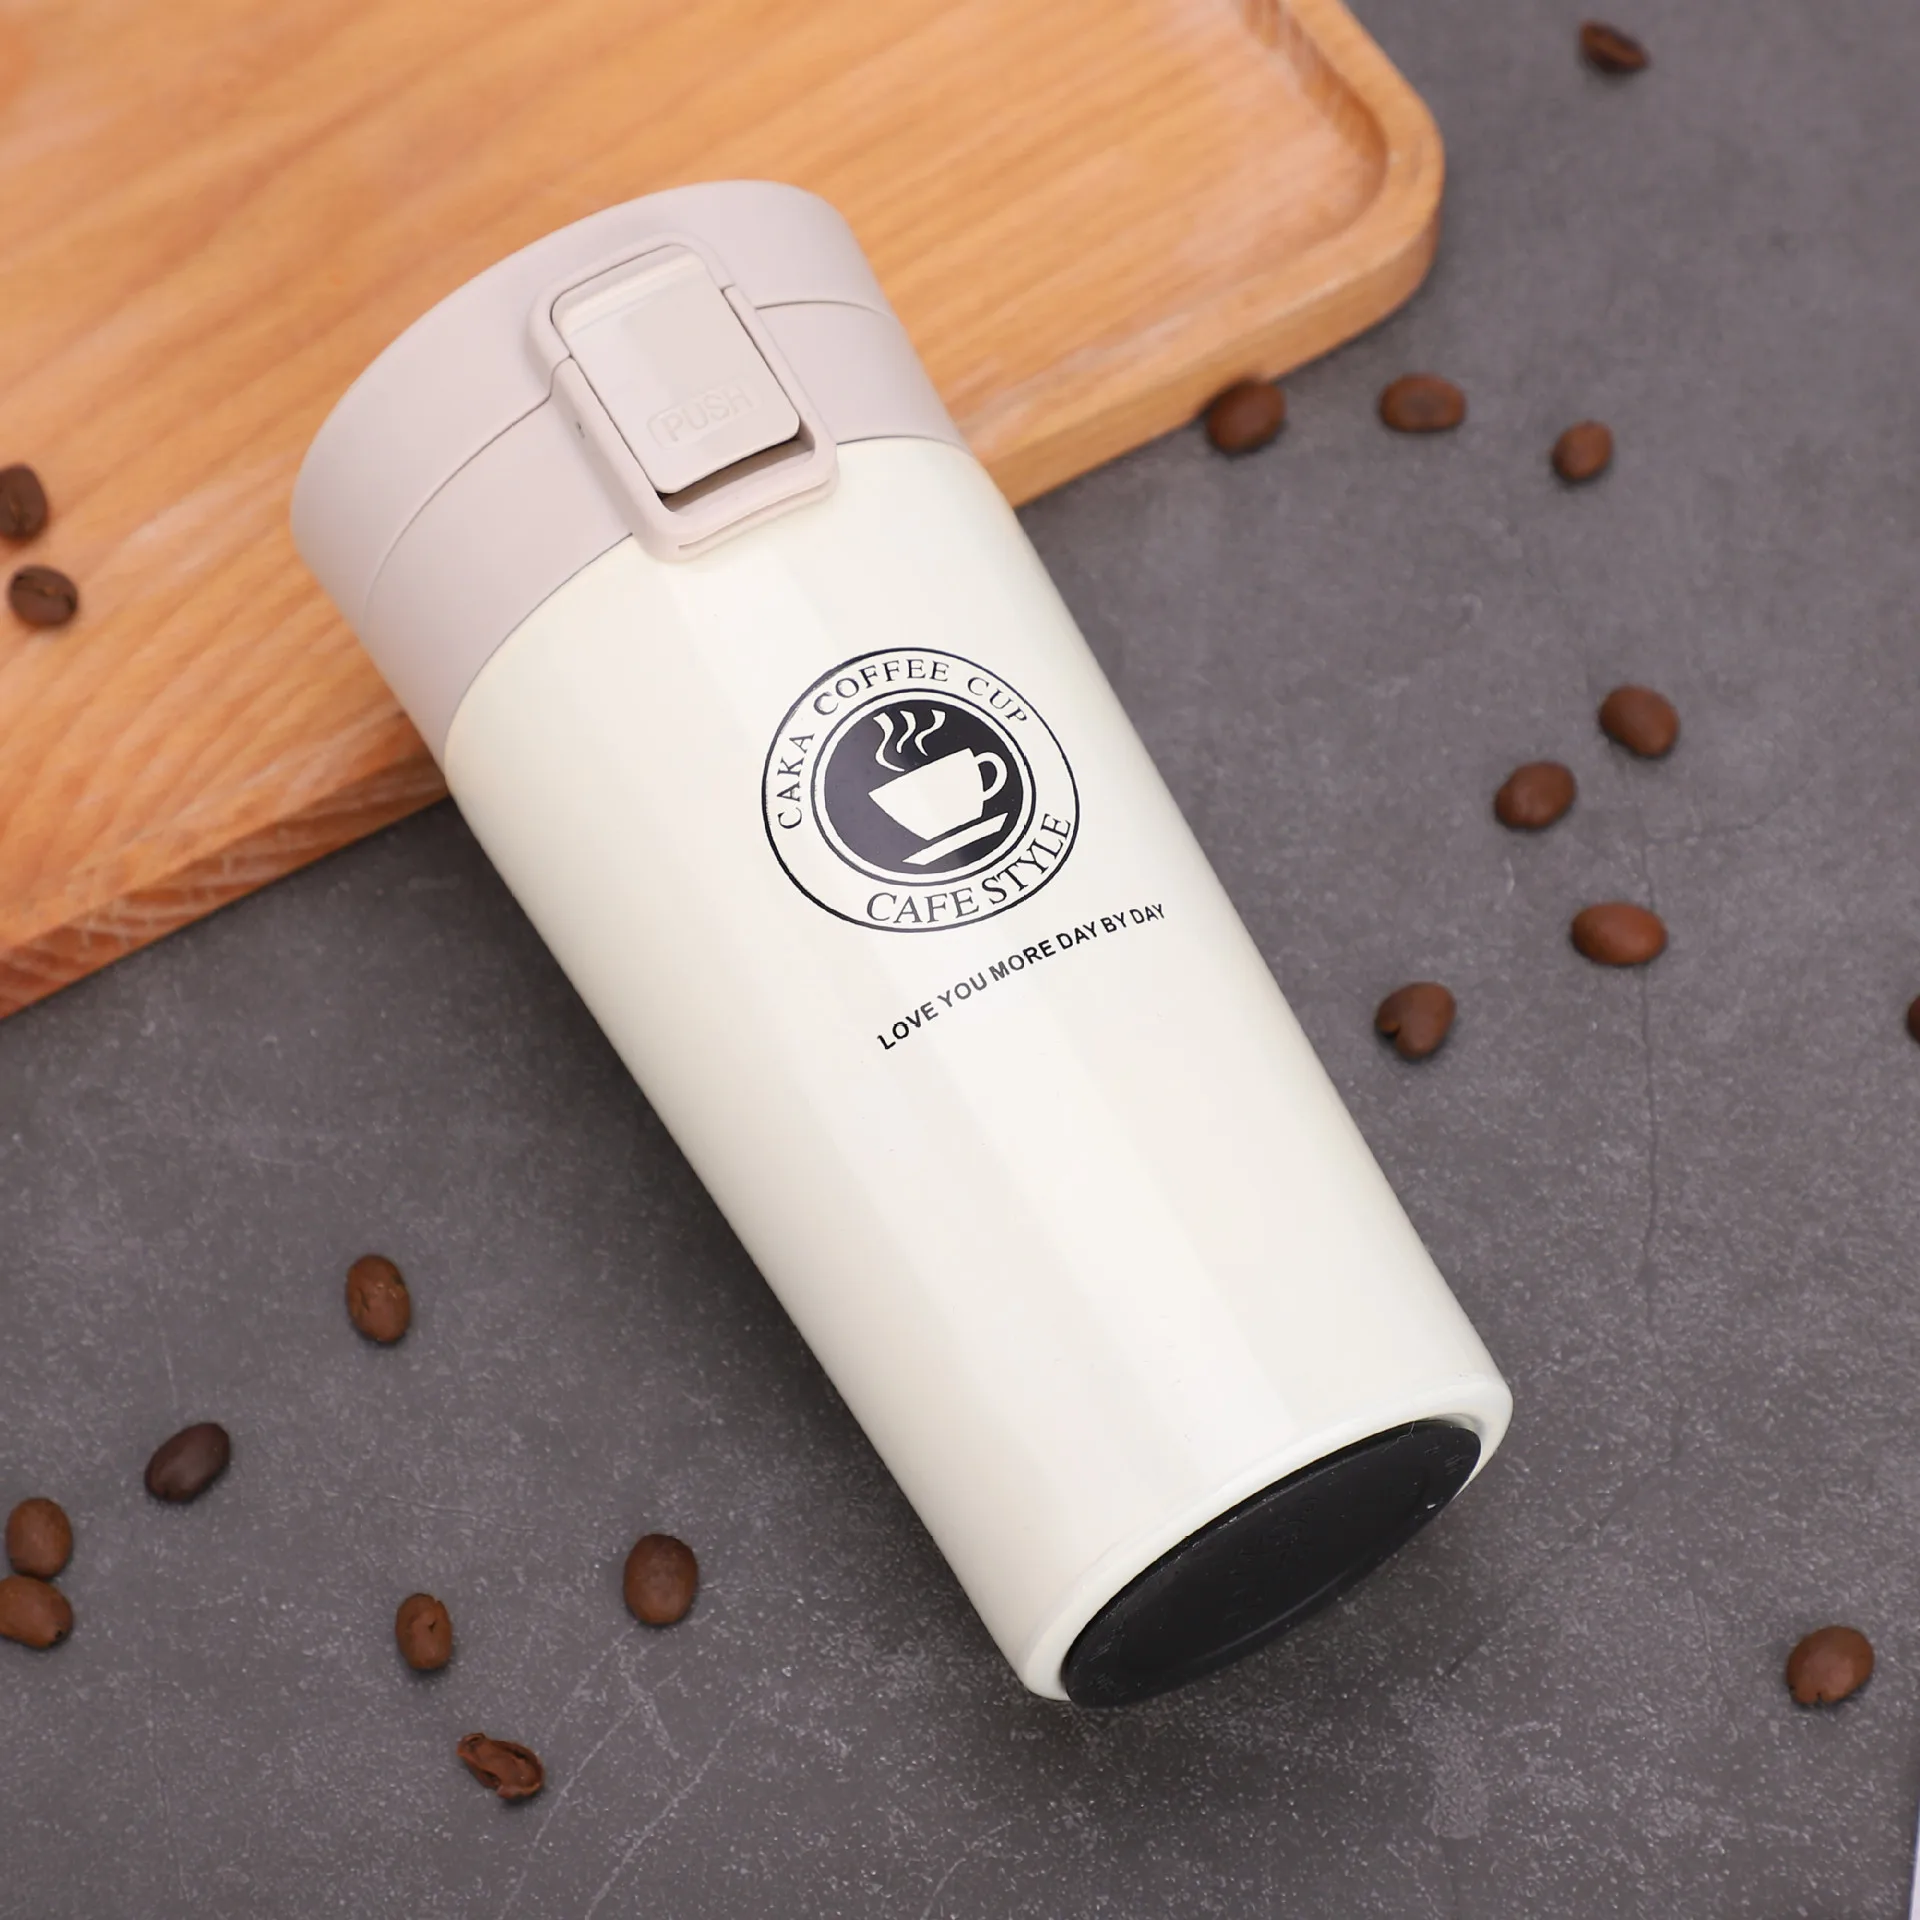 https://ae01.alicdn.com/kf/Sd4cefccde7444f029d649771bae2c191T/380ml-12oz-Thermos-Coffee-Mug-Double-Wall-Stainless-Steel-Tumbler-Vacuum-Flask-Water-Bottle-For-Girls.jpg